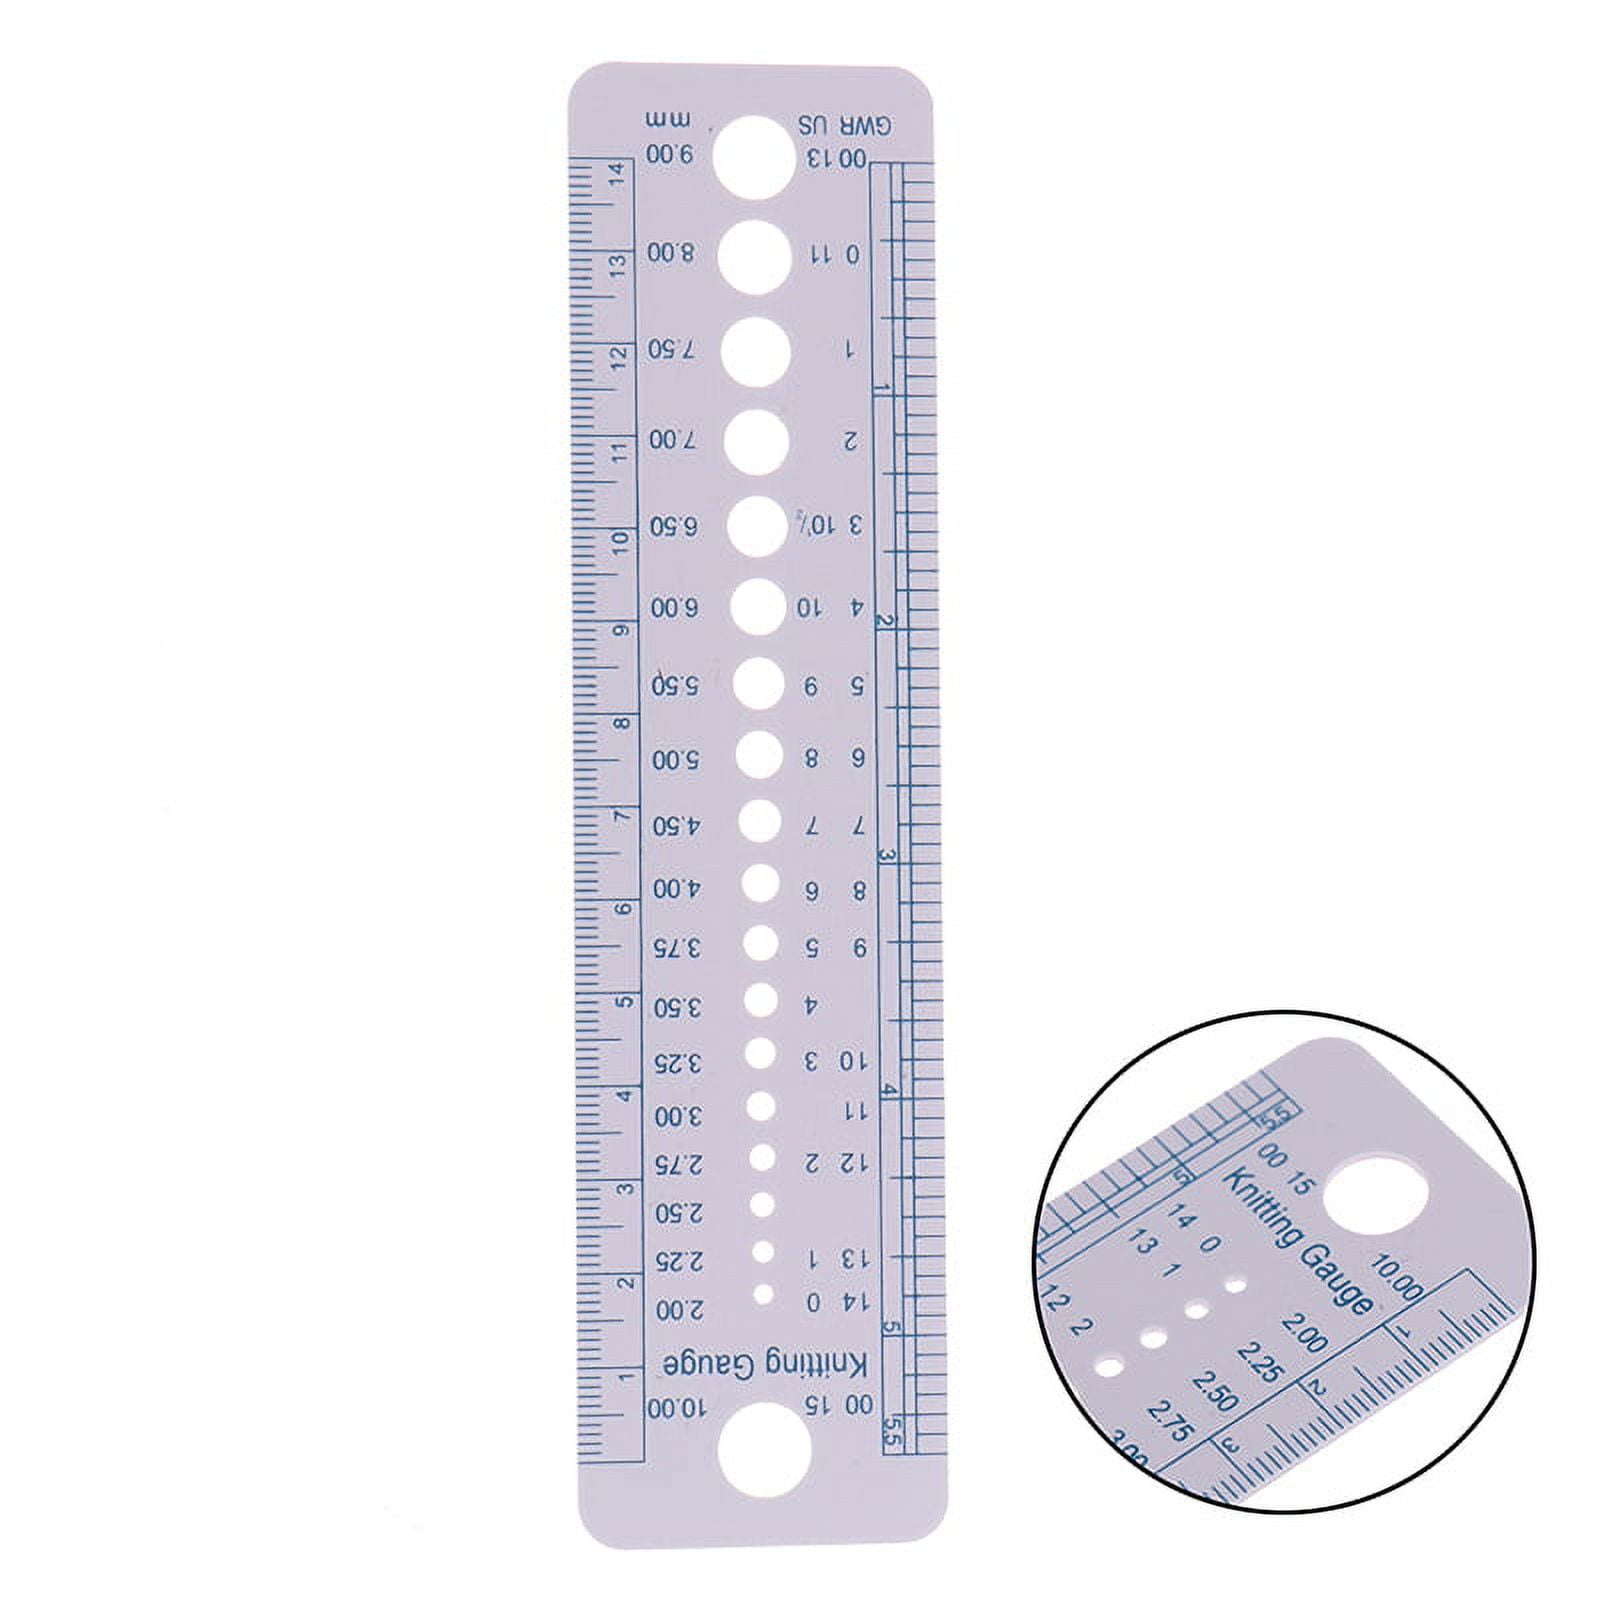 Sewing Gauge (Imperial Version)  Donwei, SewMate, X'Sor, Bobbins,  Scissors, Rotary Cutter, Quilting Ruler, Cutting Mat, Quilting Tools, Sewing  Notion, Craft Supplies, Knitting Needle, Crochet Hook, Needle, Ruler, Pins,  Sewing Box, Sewing